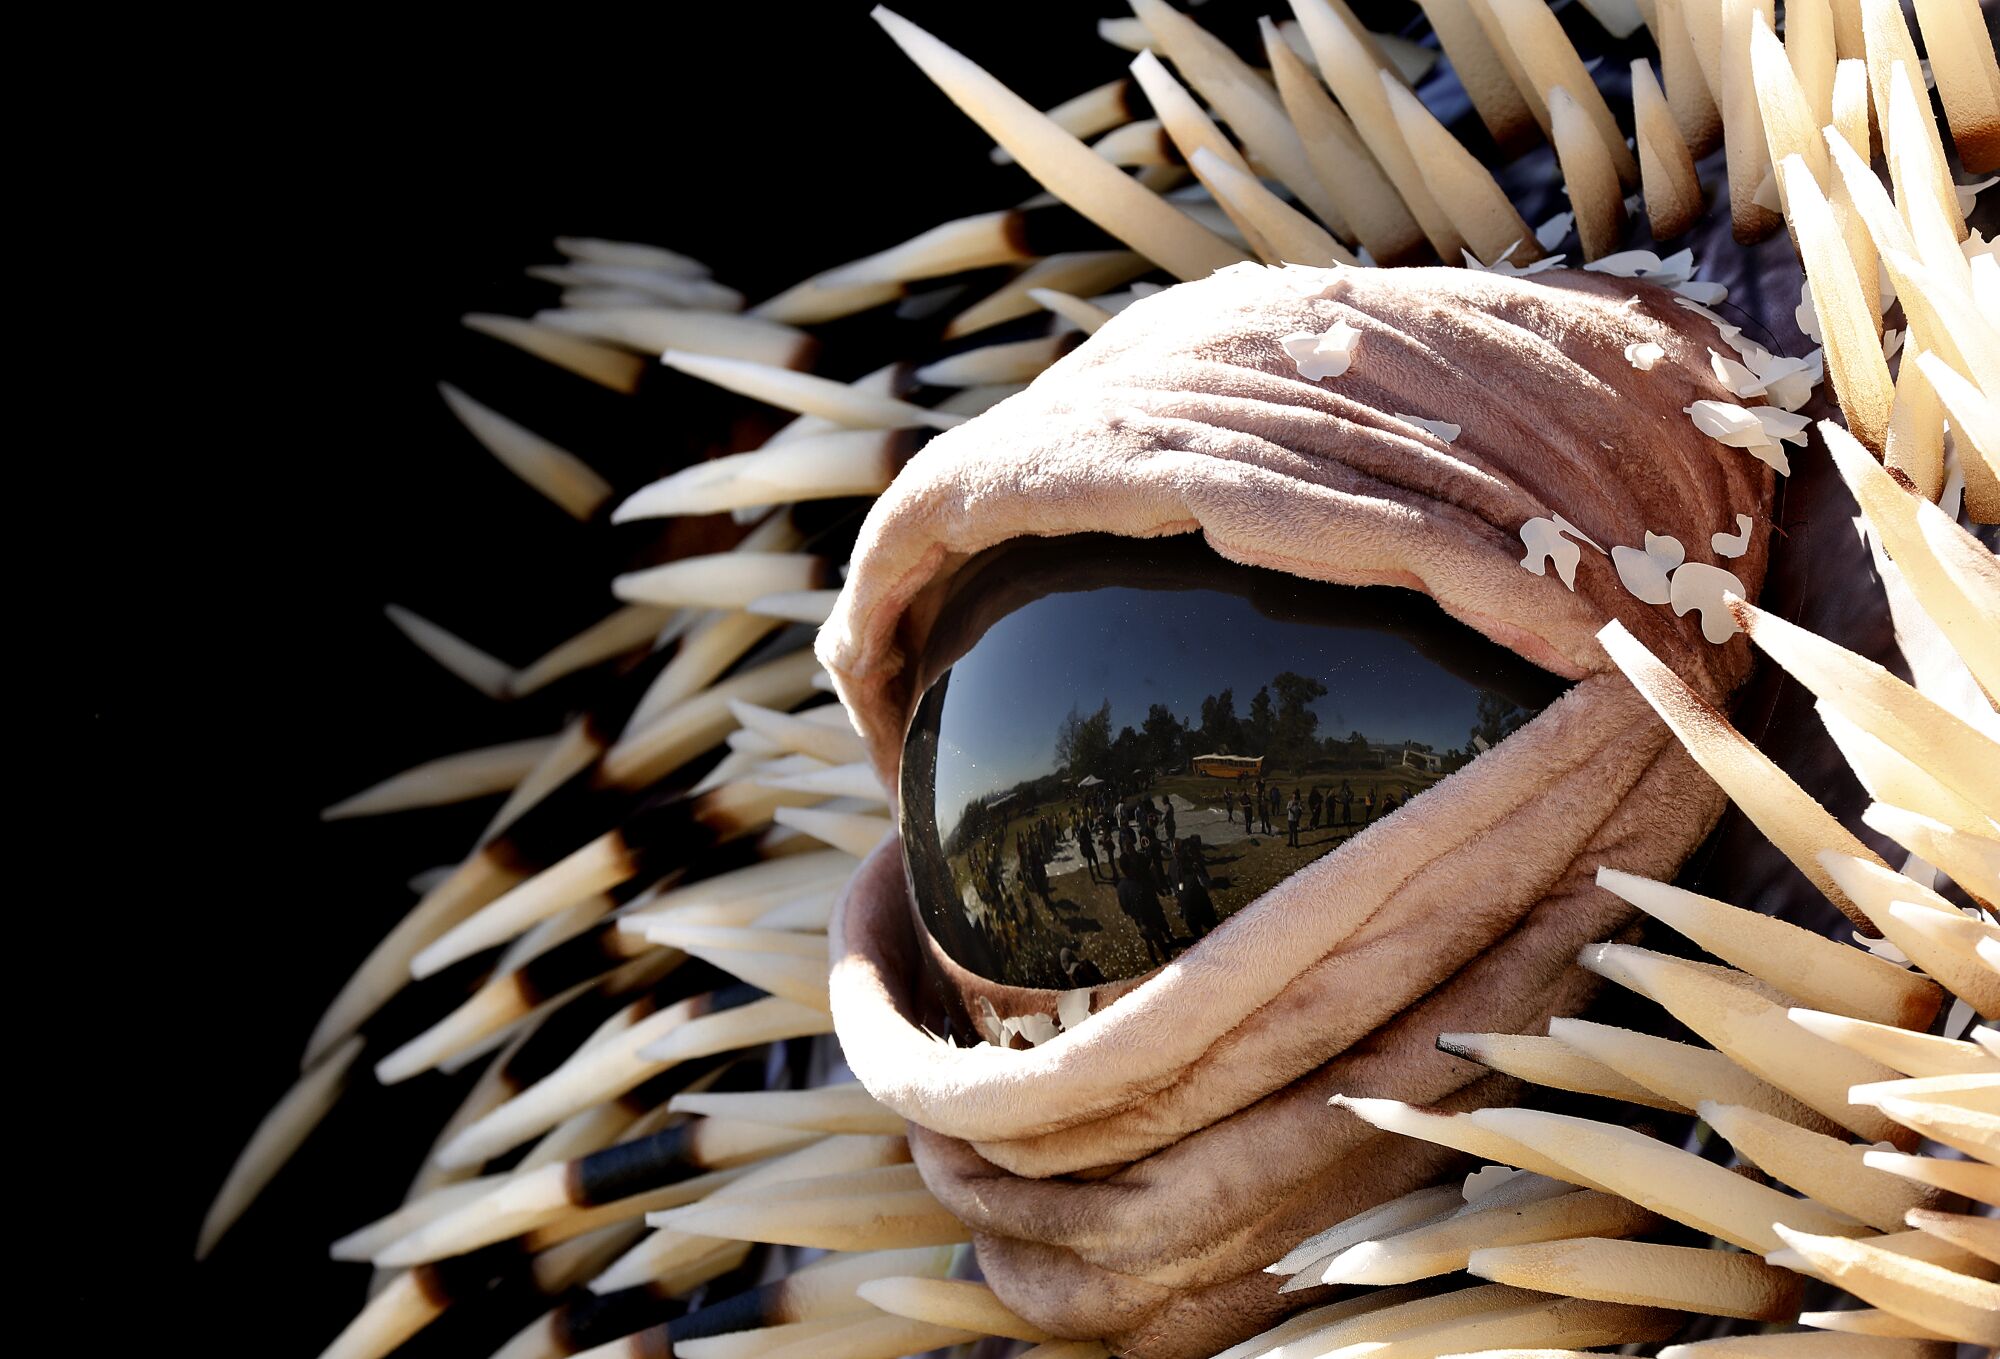 The eye of Percy the Porcupine.